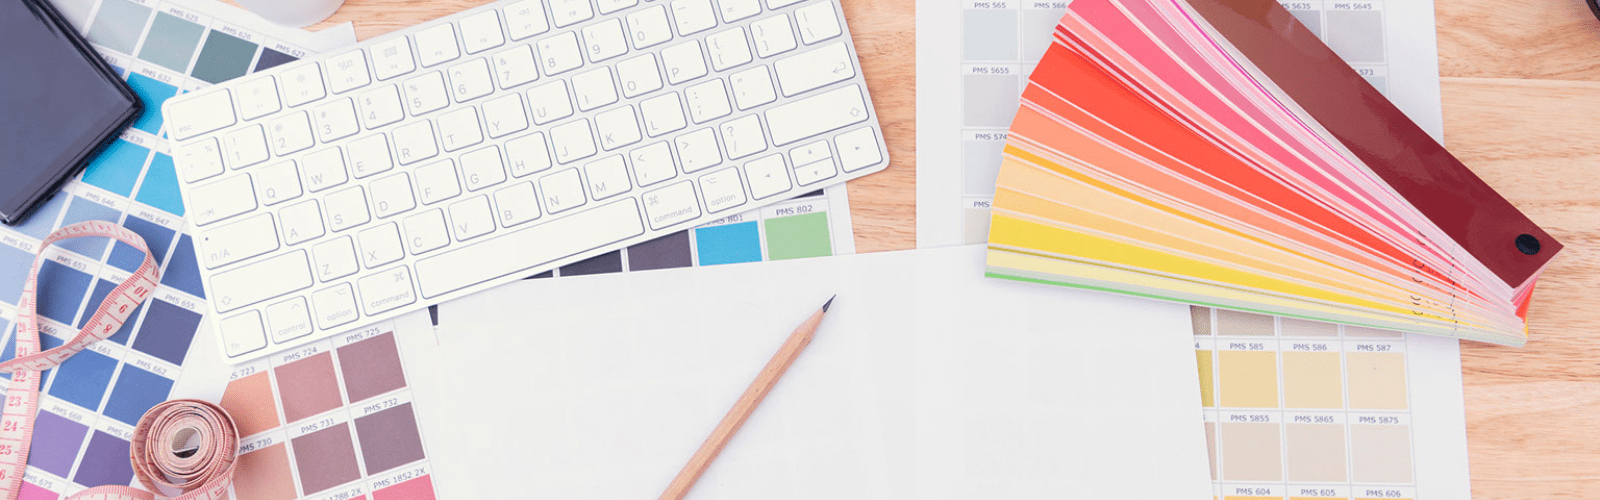 What to expect when hiring a graphic designer